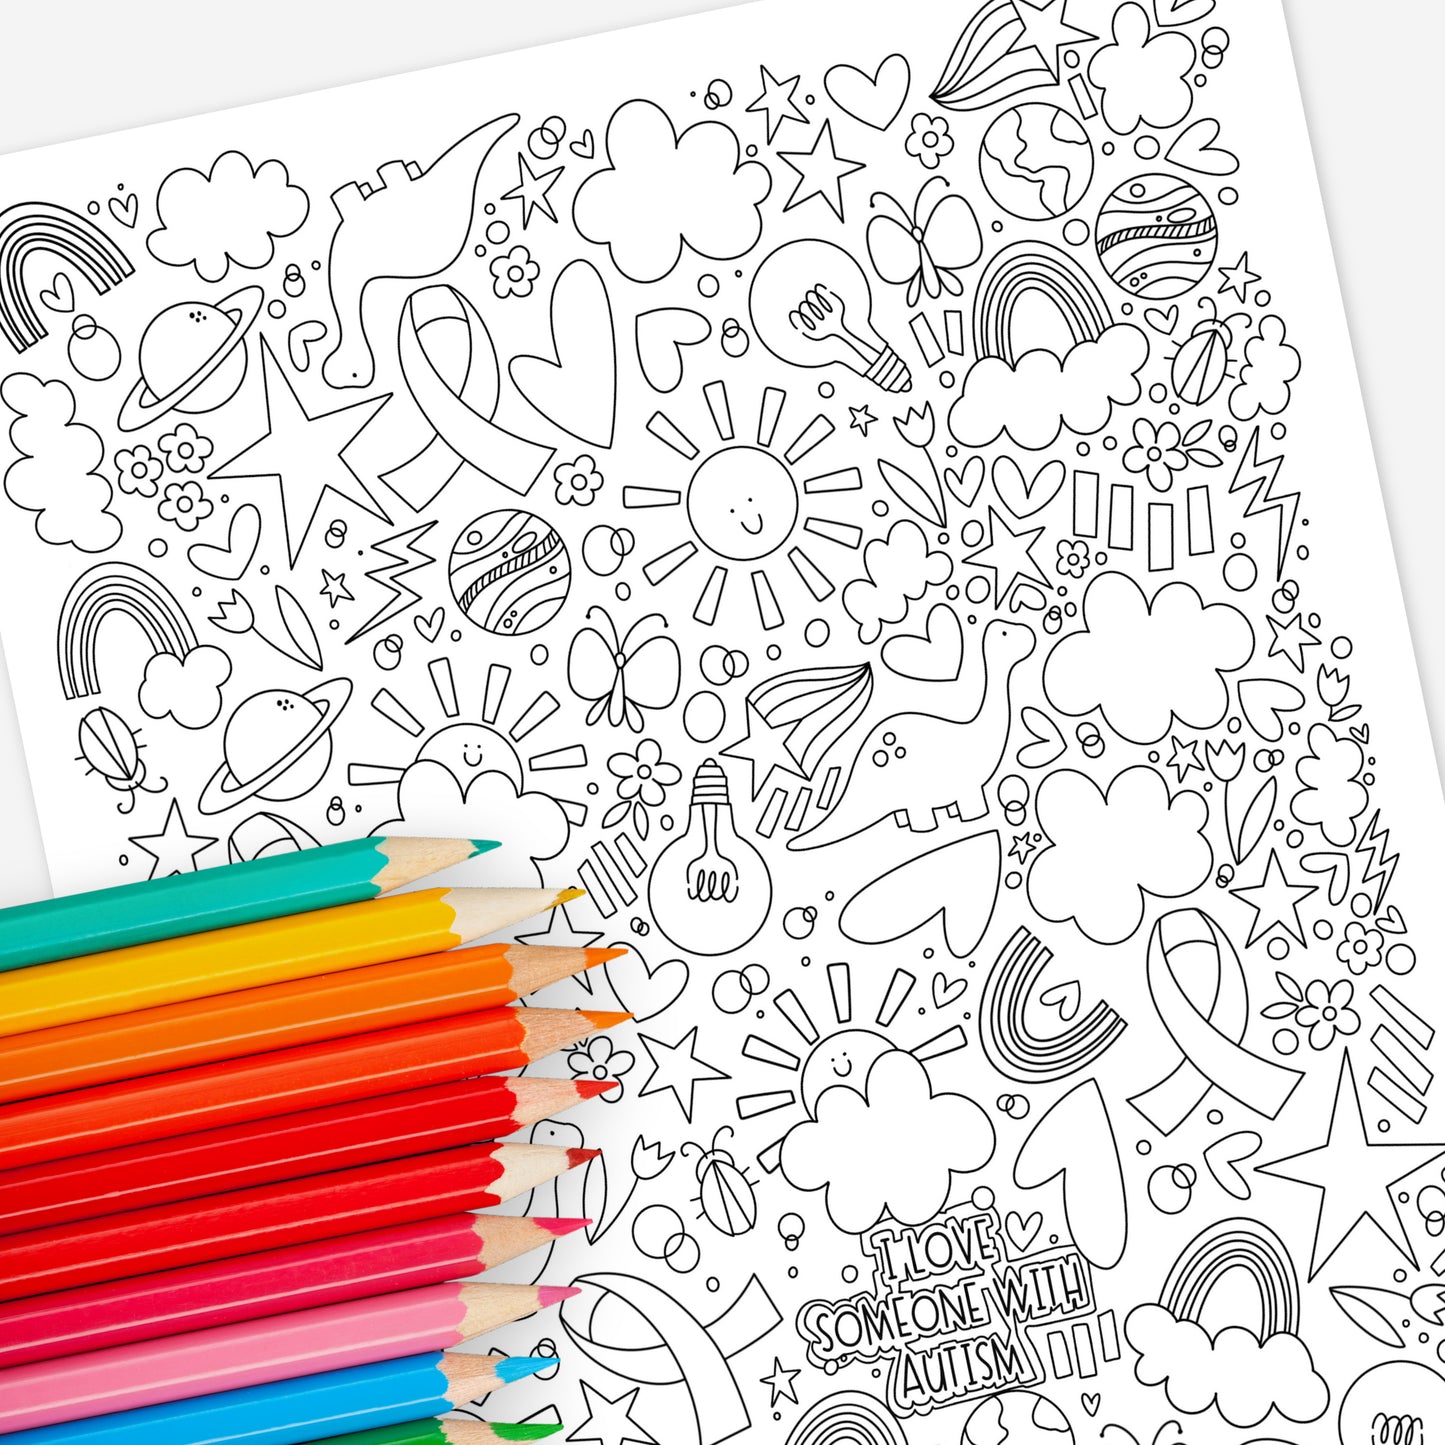 10Pk Celebrate Autism | Neurodiversity Inclusion Acceptance & Awareness | Hand-Drawn Coloring Pages